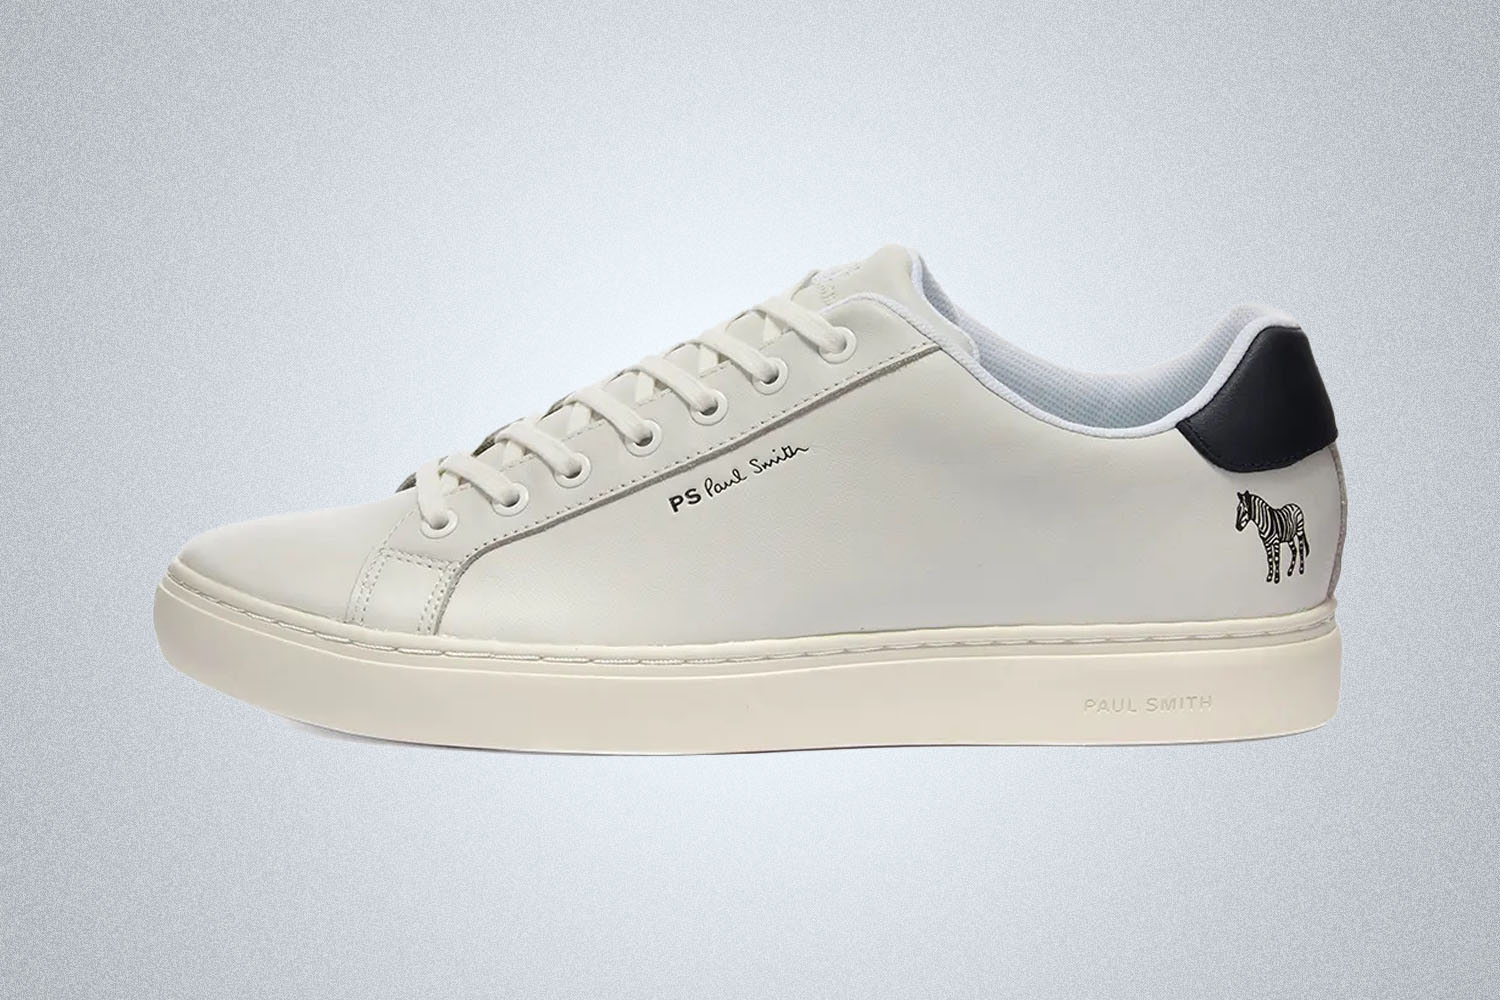 an all white Paul Smith Rex sneaker on a white background